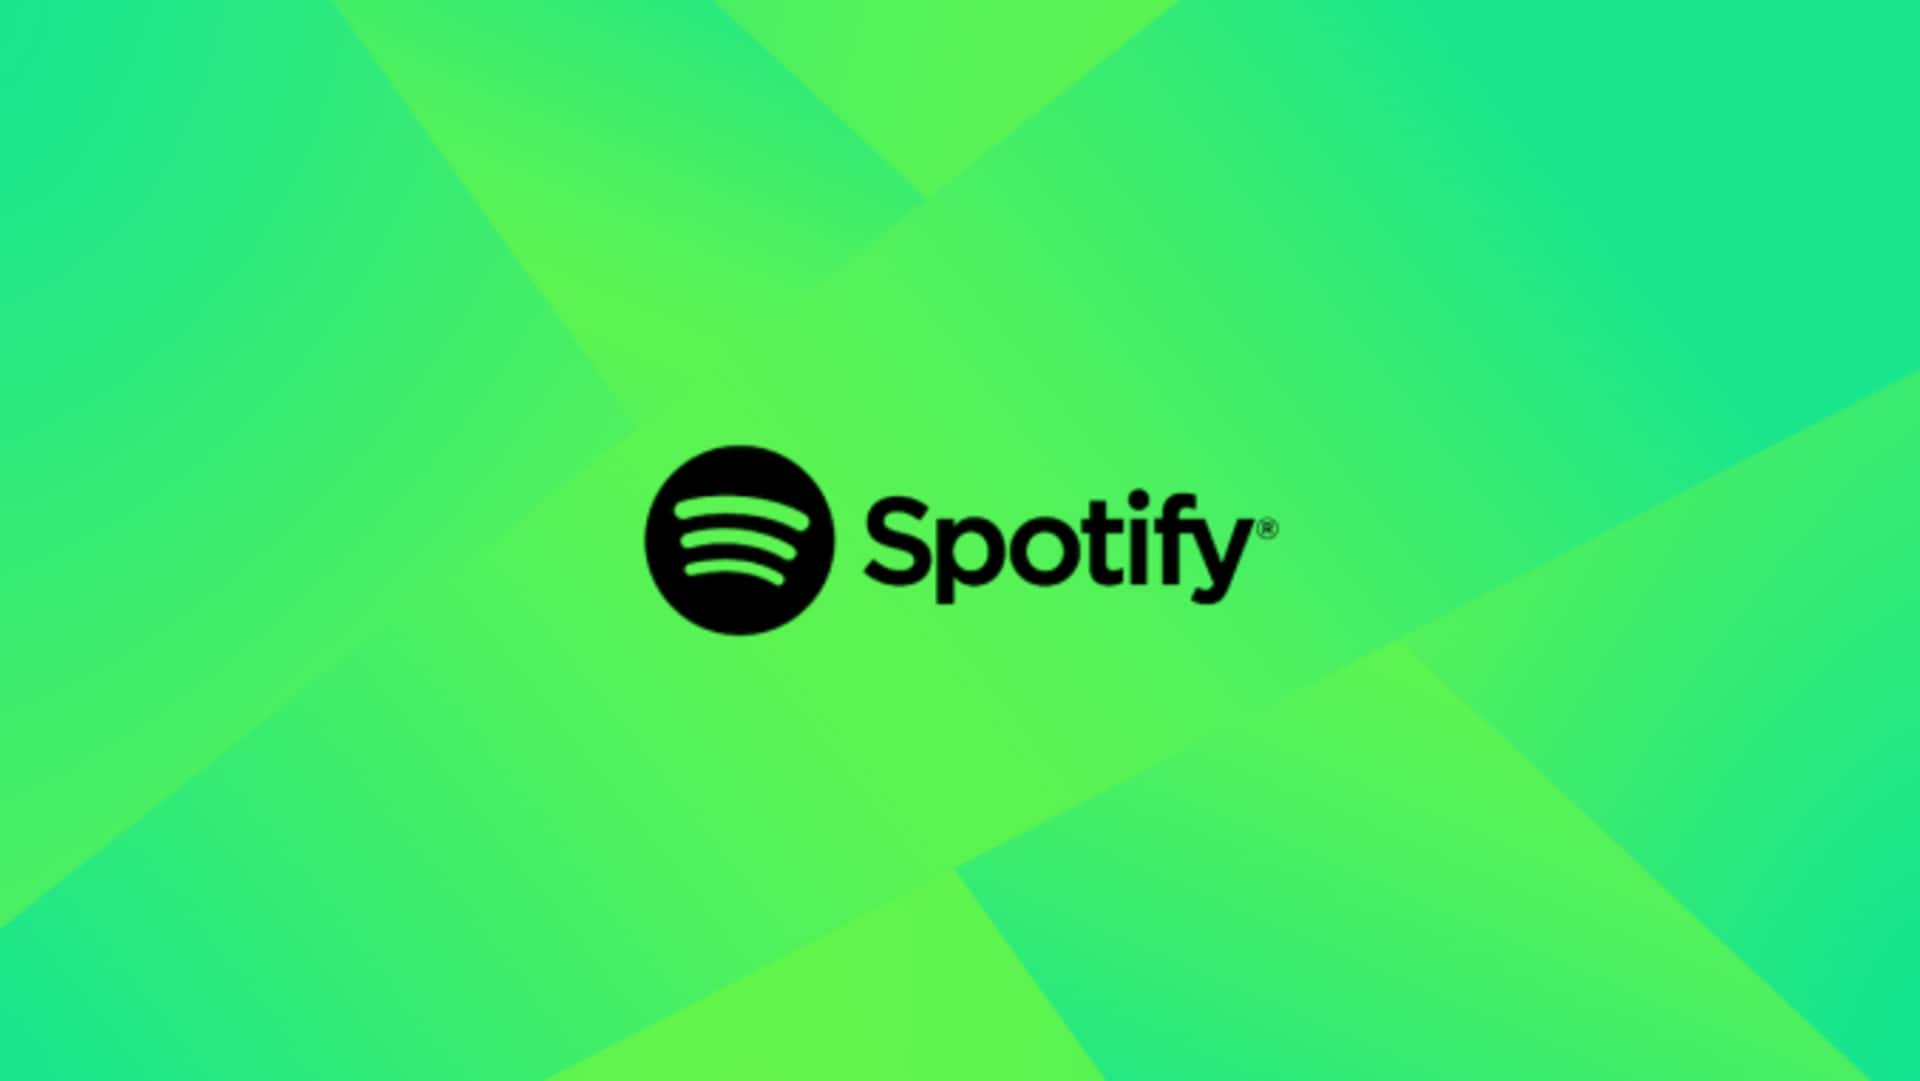 Spotify launches 'Creative Lab' to develop tailored ads for brands